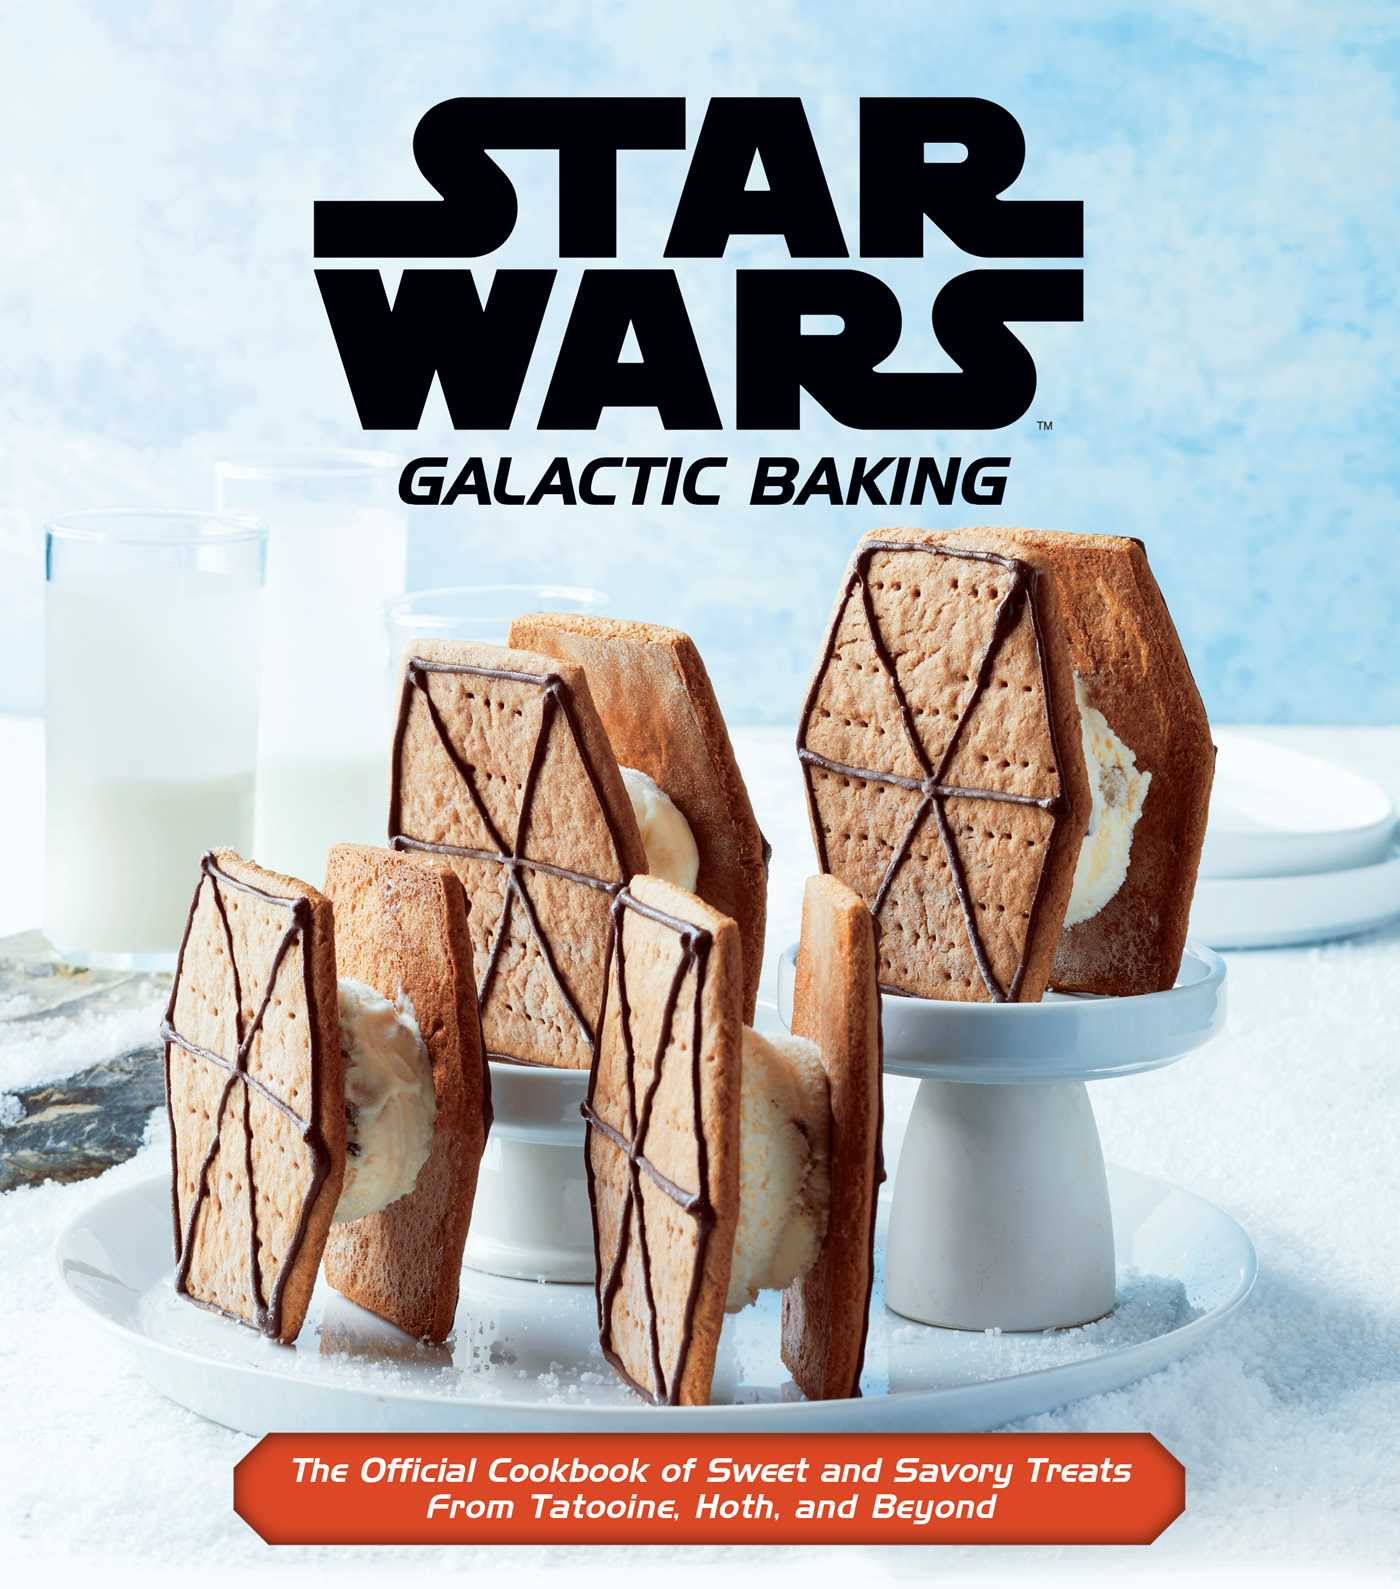 pdf download Star Wars: Galactic Baking: The Official Cookbook of Sweet and Savory Treats From Tatooine, Hoth, and Beyond